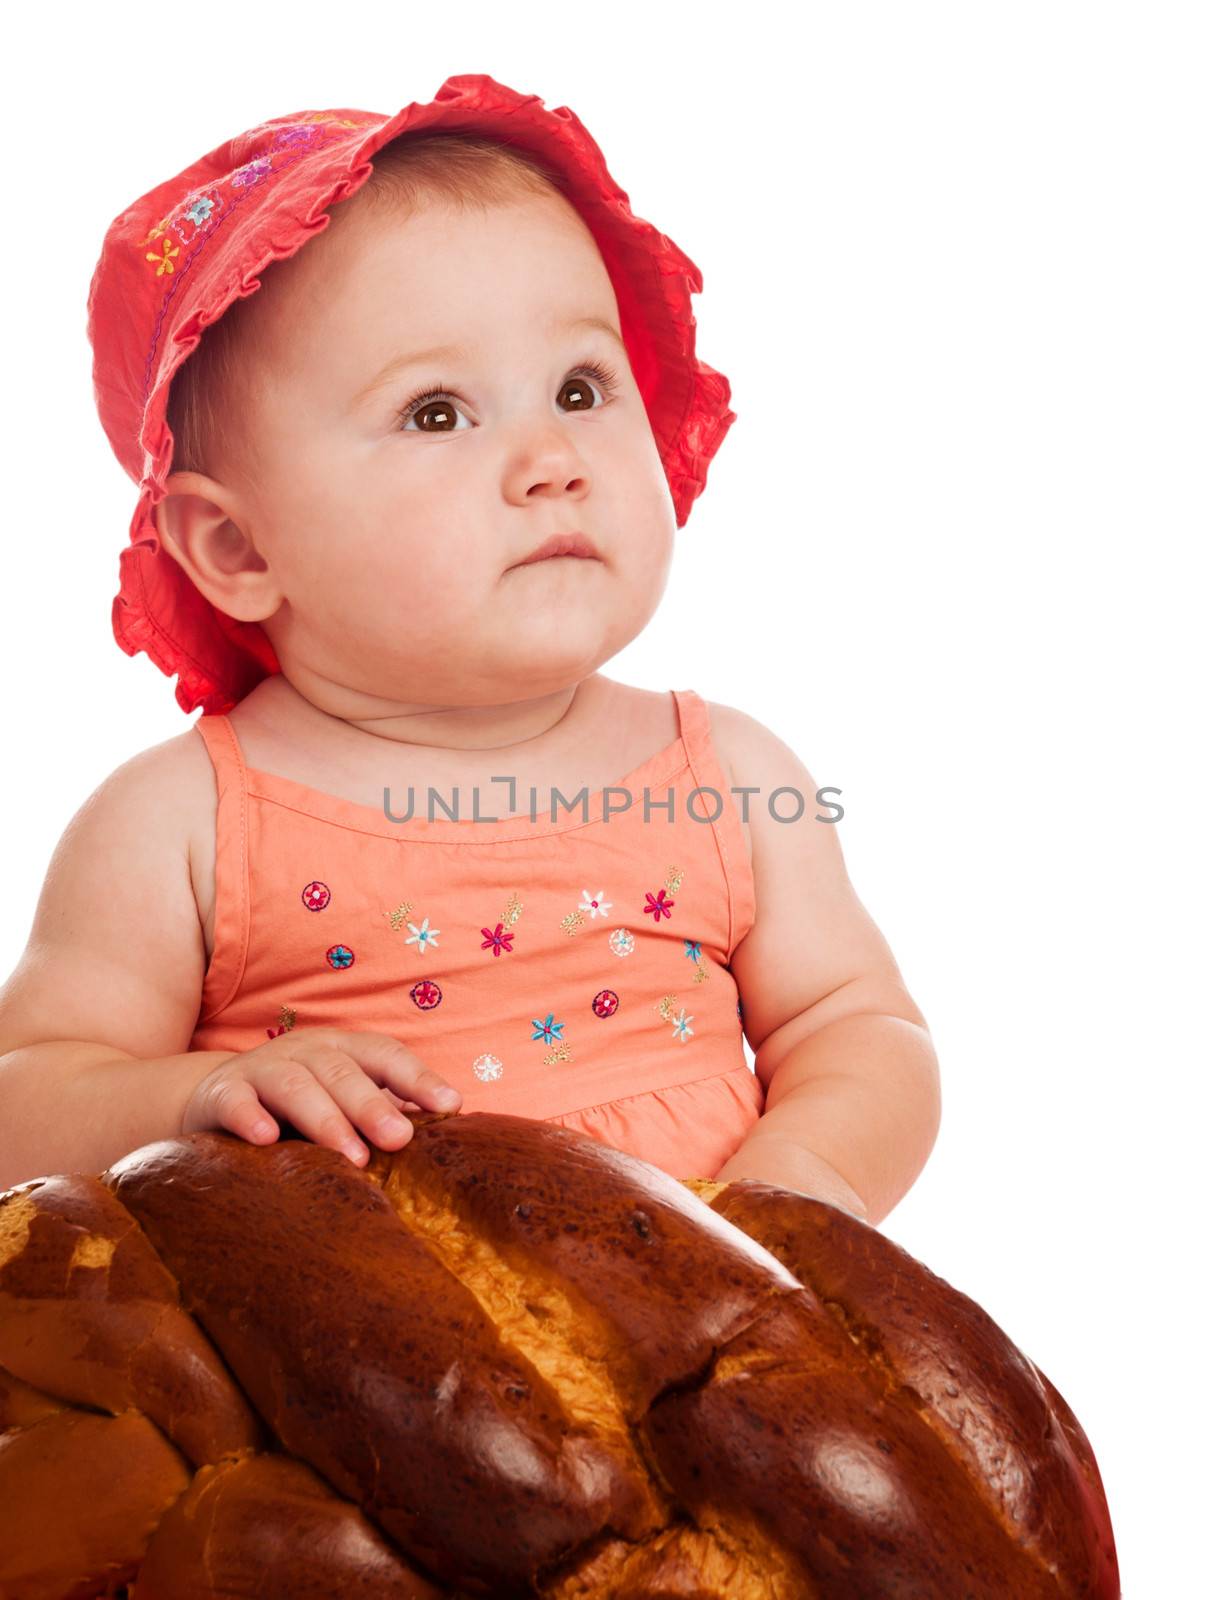 Baby girl in a pink hat holding bread. Isolated on white